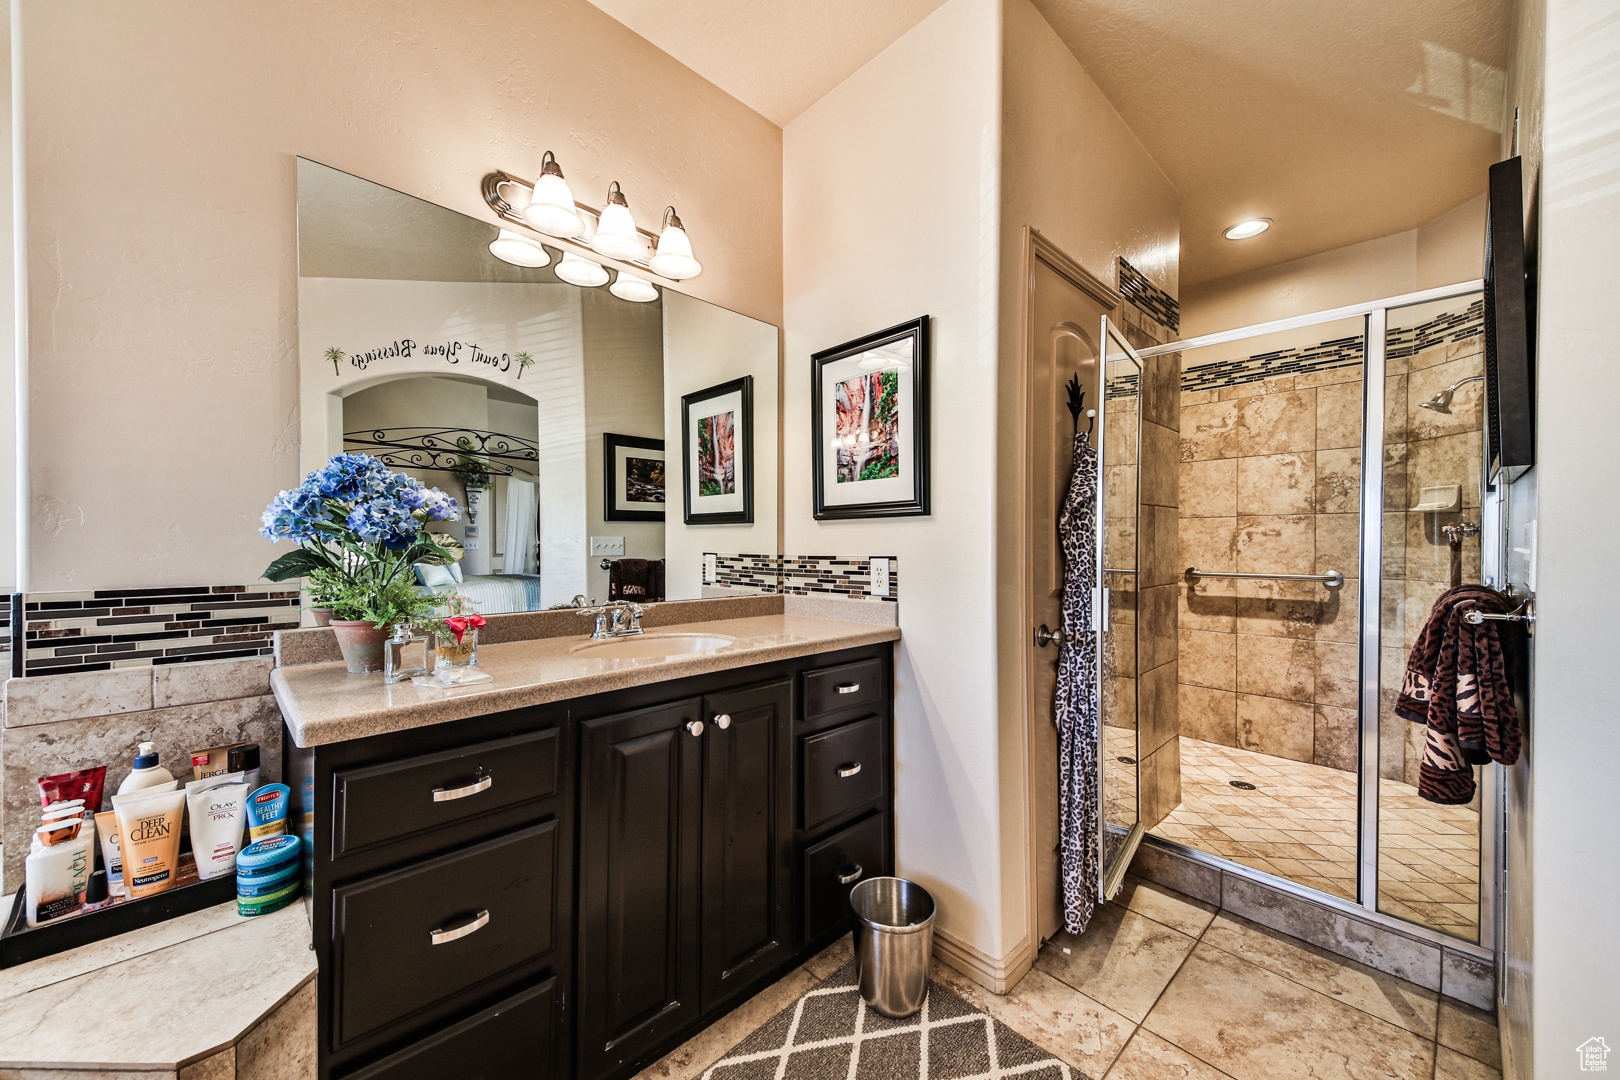 Bathroom featuring an enclosed shower, vanity, and tile floors